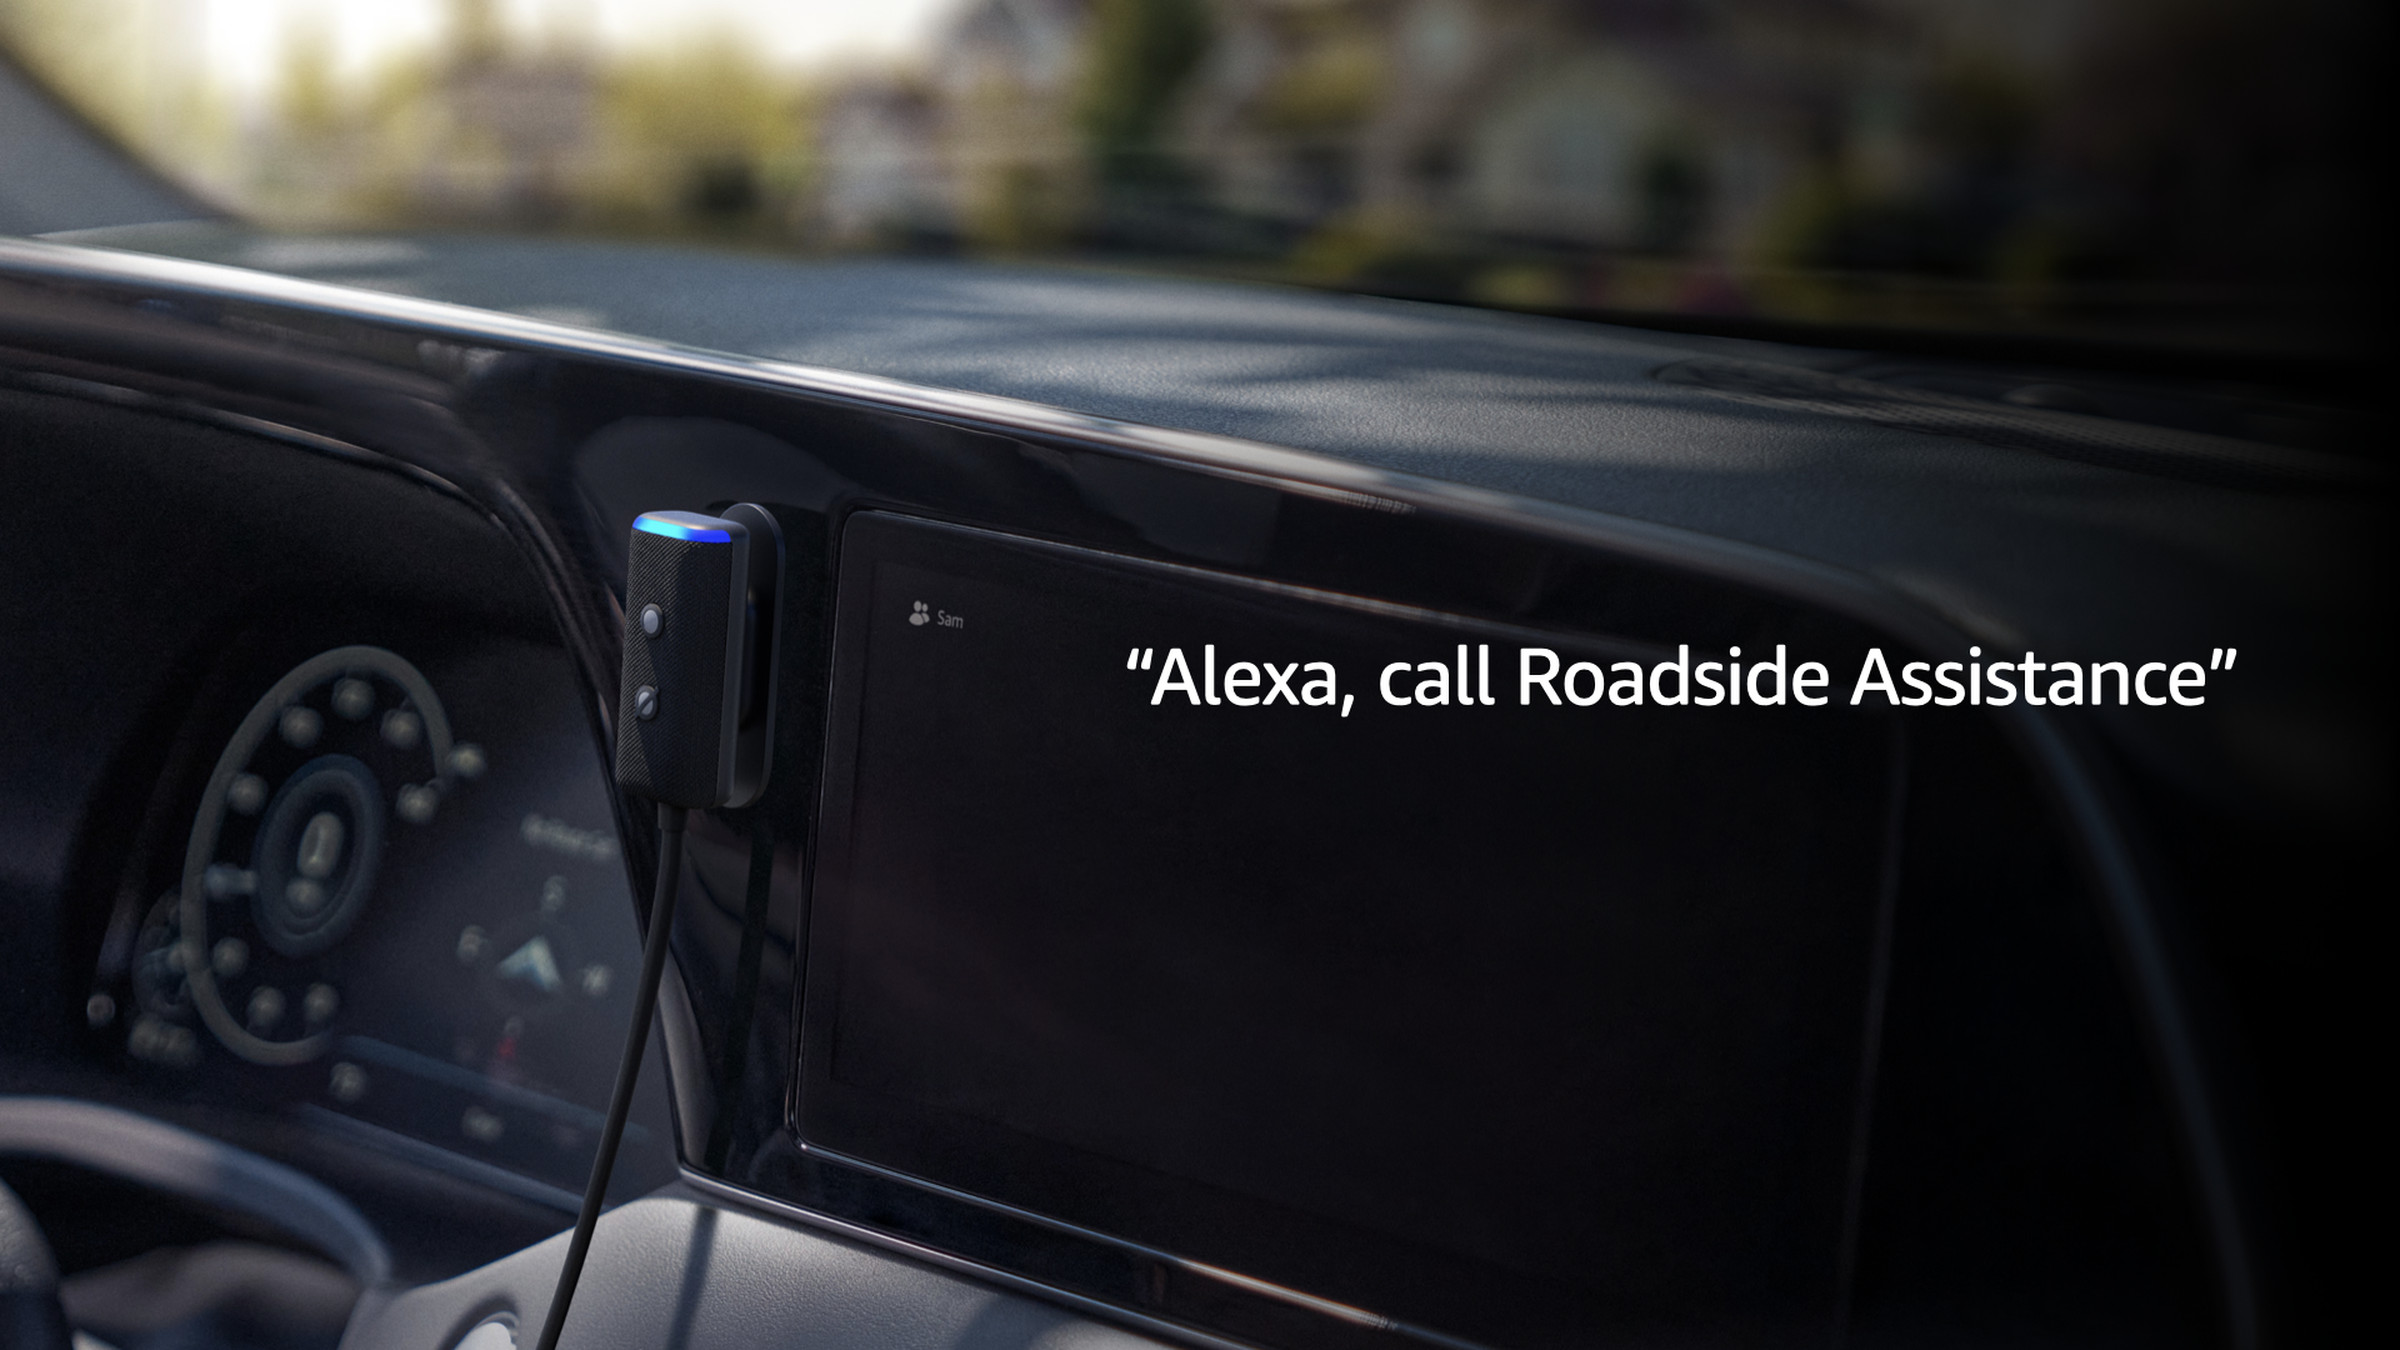 An image of the new Amazon Echo Auto mounted on a car’s dashboard with the text Alexa, Call Roadside Assistance overlaid on top.